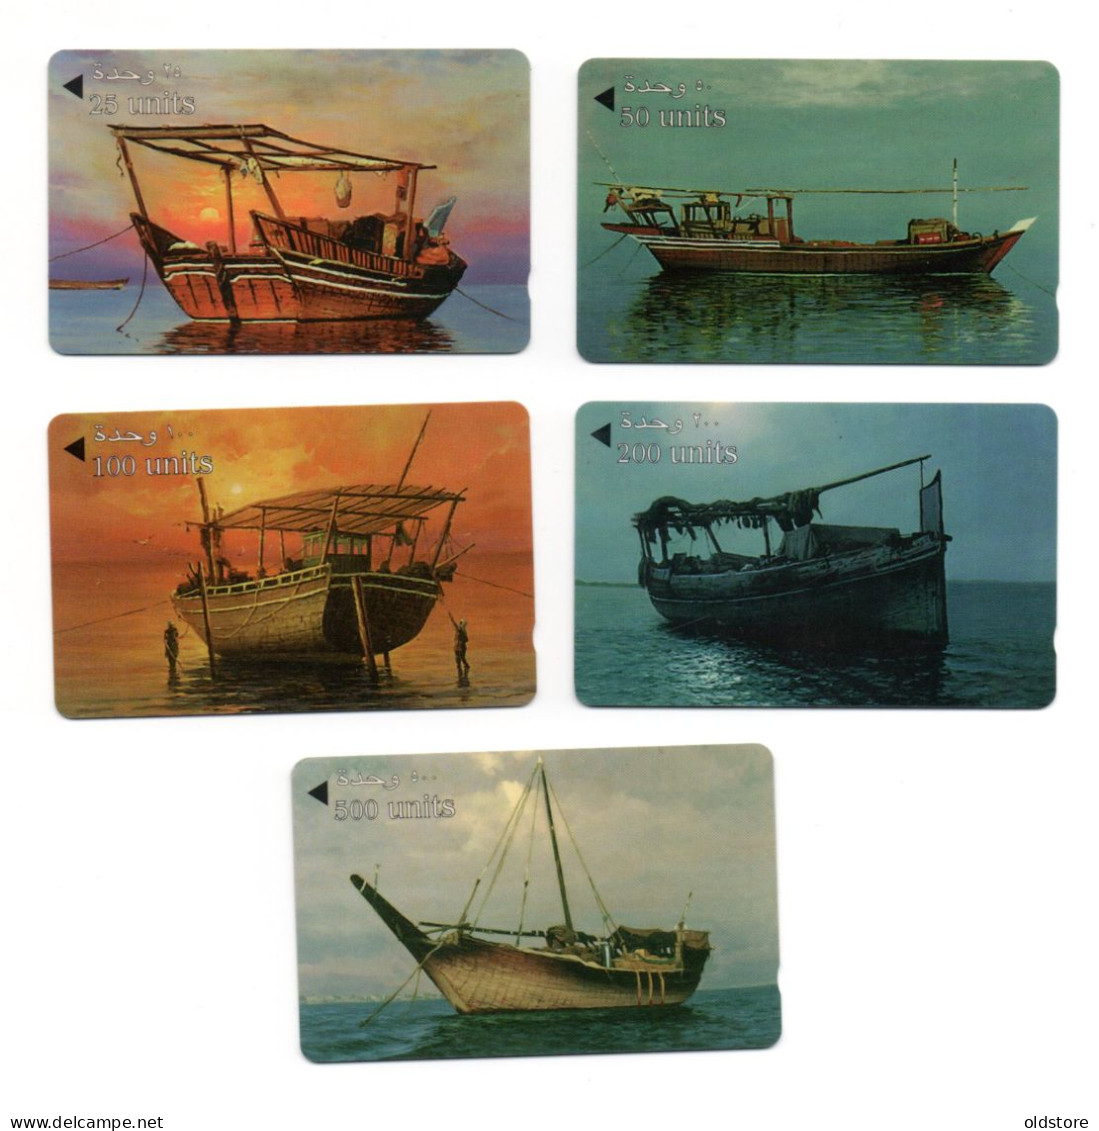 Bahrain Phonecards - Types Of Boats In Bahrain - 5 Cards Complete  Set - ND 1999 - Batelco #2 Used Cards - Bahrein